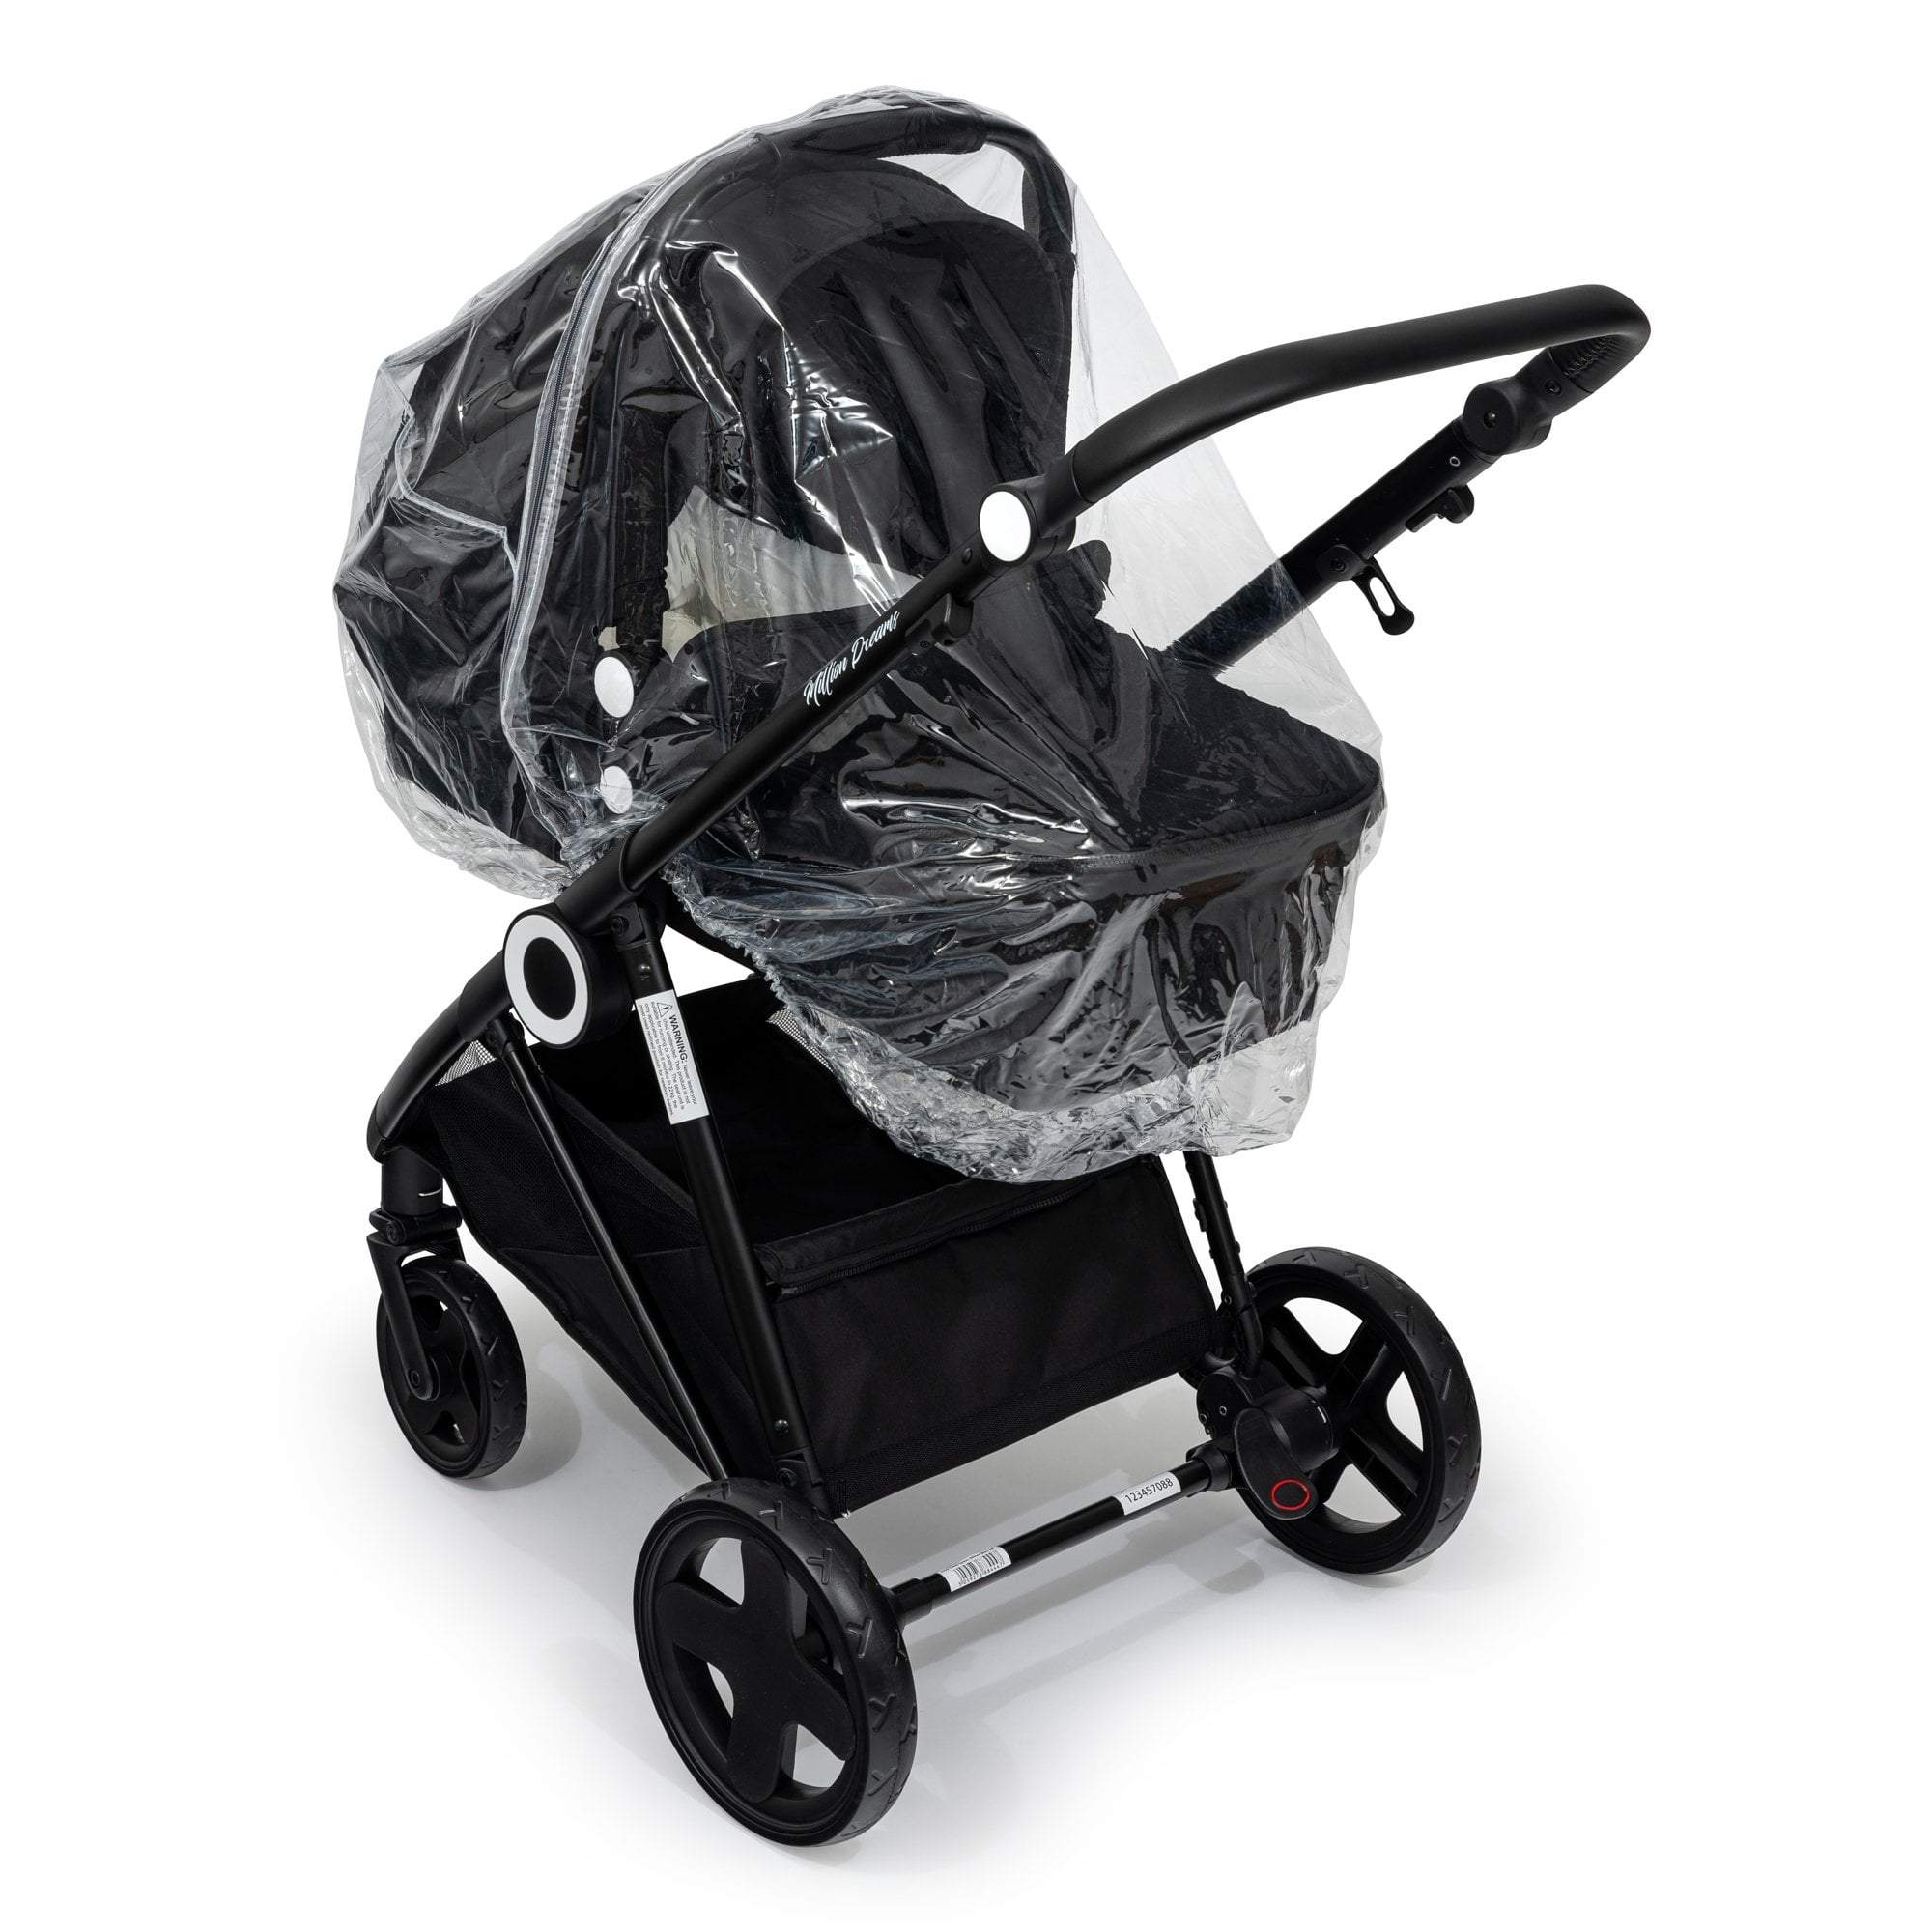 Carrycot Raincover Compatible With Mamas & Papas - Fits All Models - For Your Little One